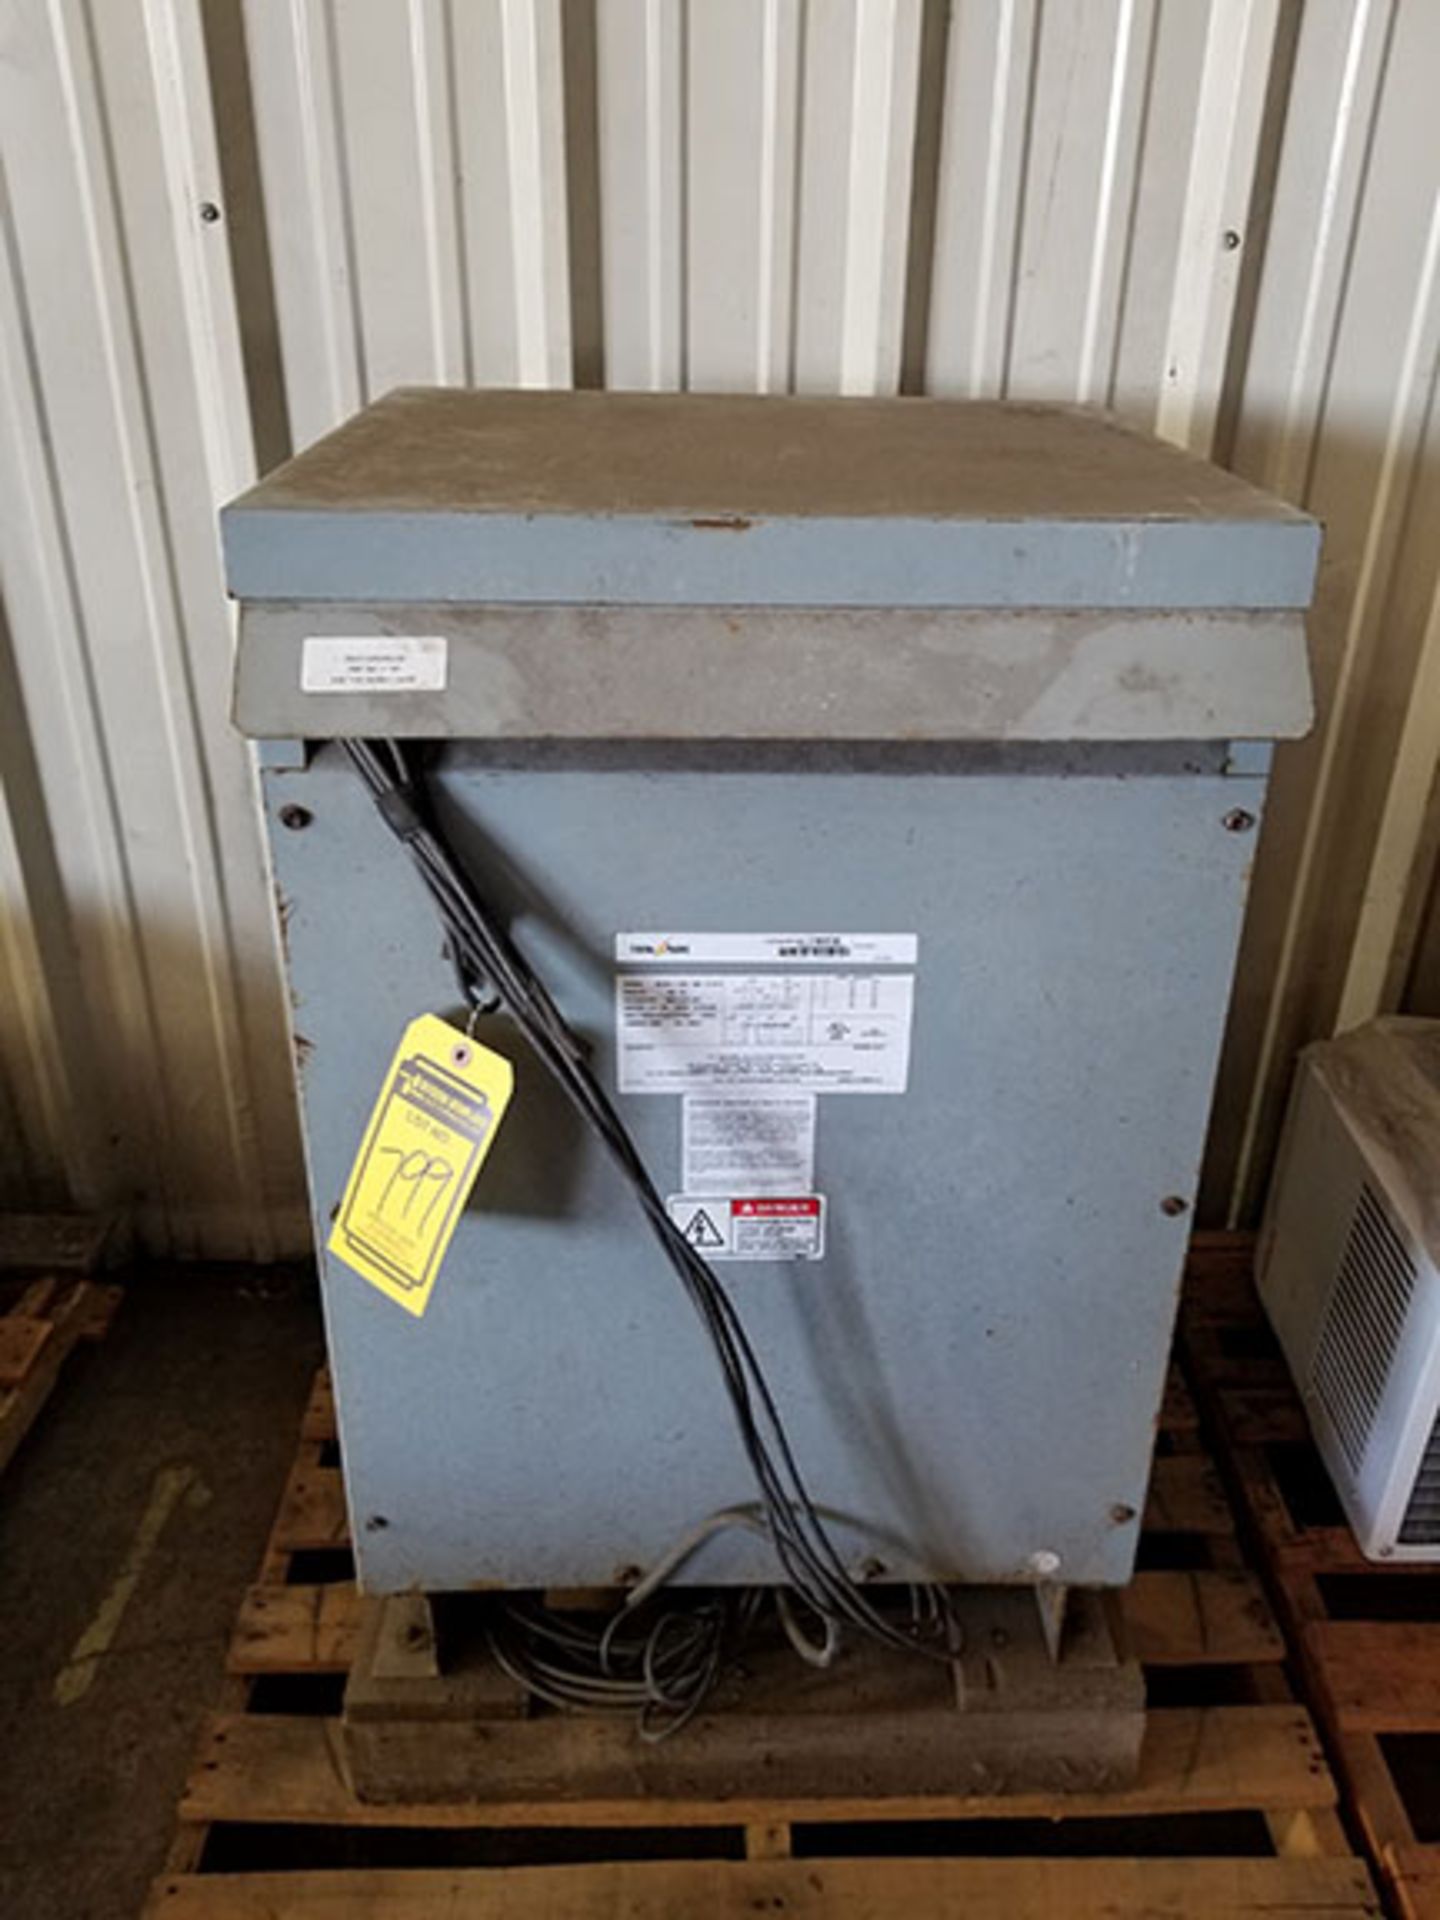 FEDERAL PACIFIC 30KVA DRY TYPE TRANSFORMER, 3 PHASE, 60HZ, MODEL 36B - Image 3 of 4